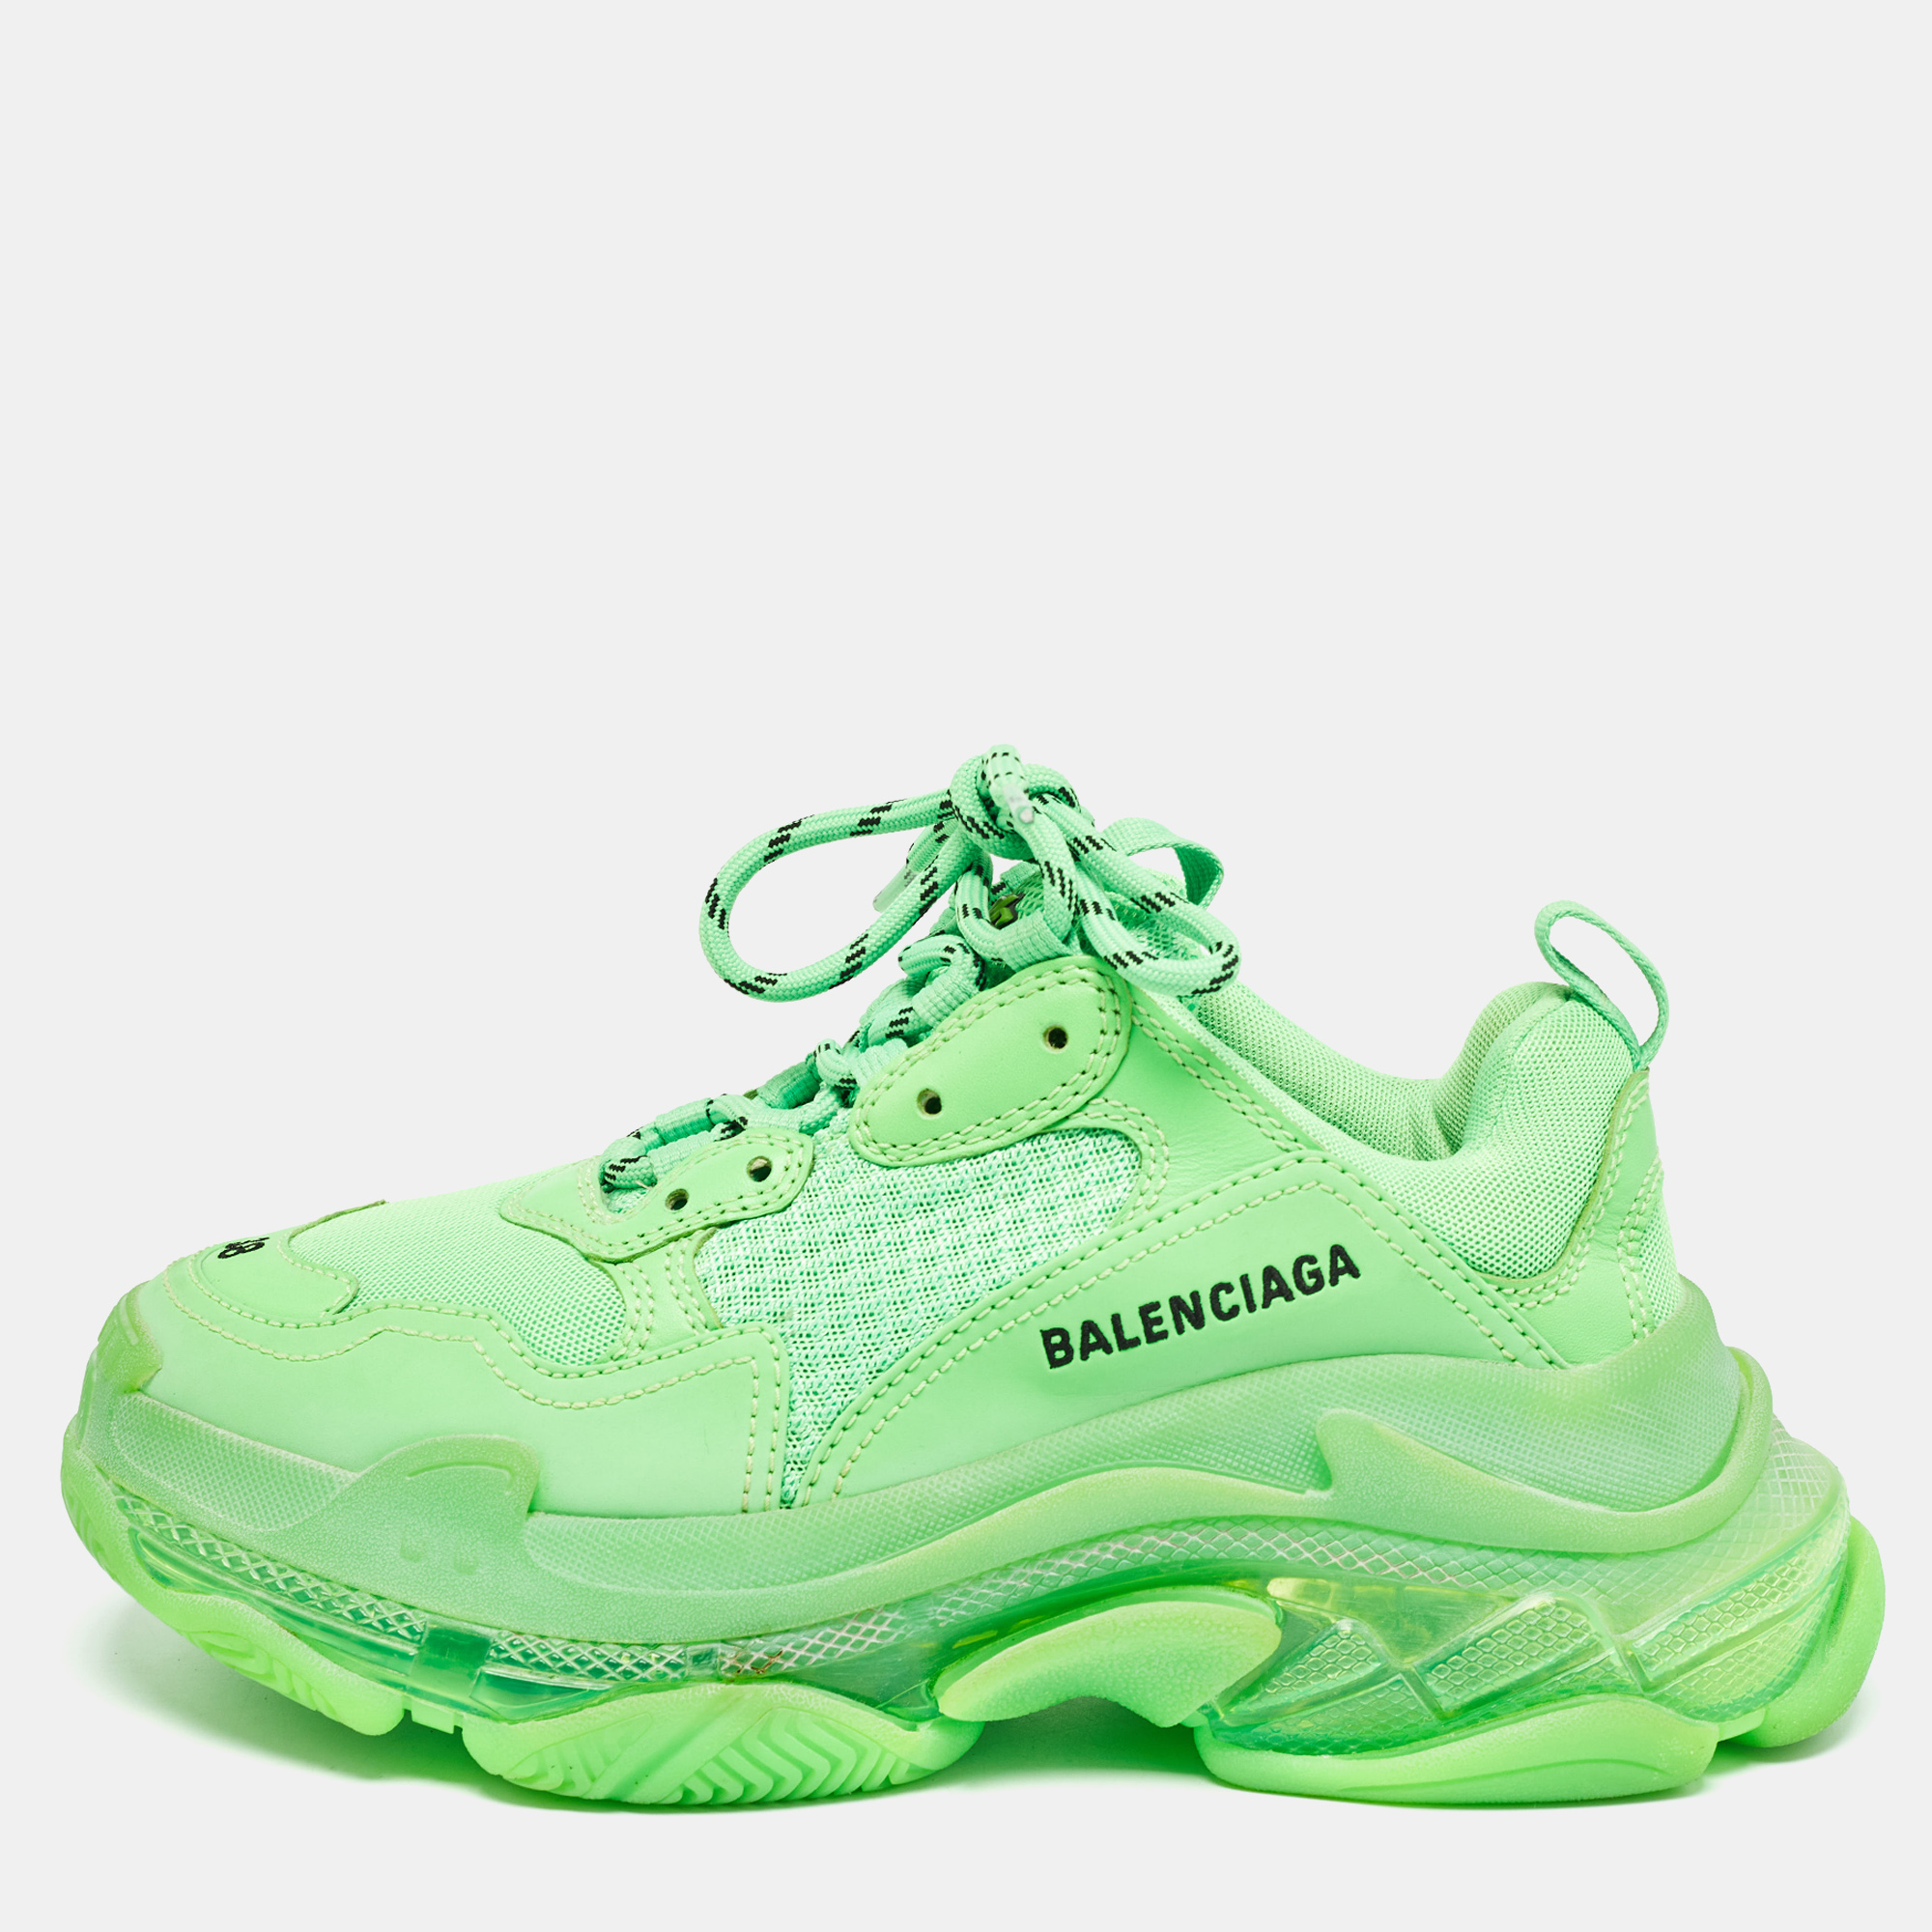 Balenciaga neon green mesh and leather triple s sneakers size 38